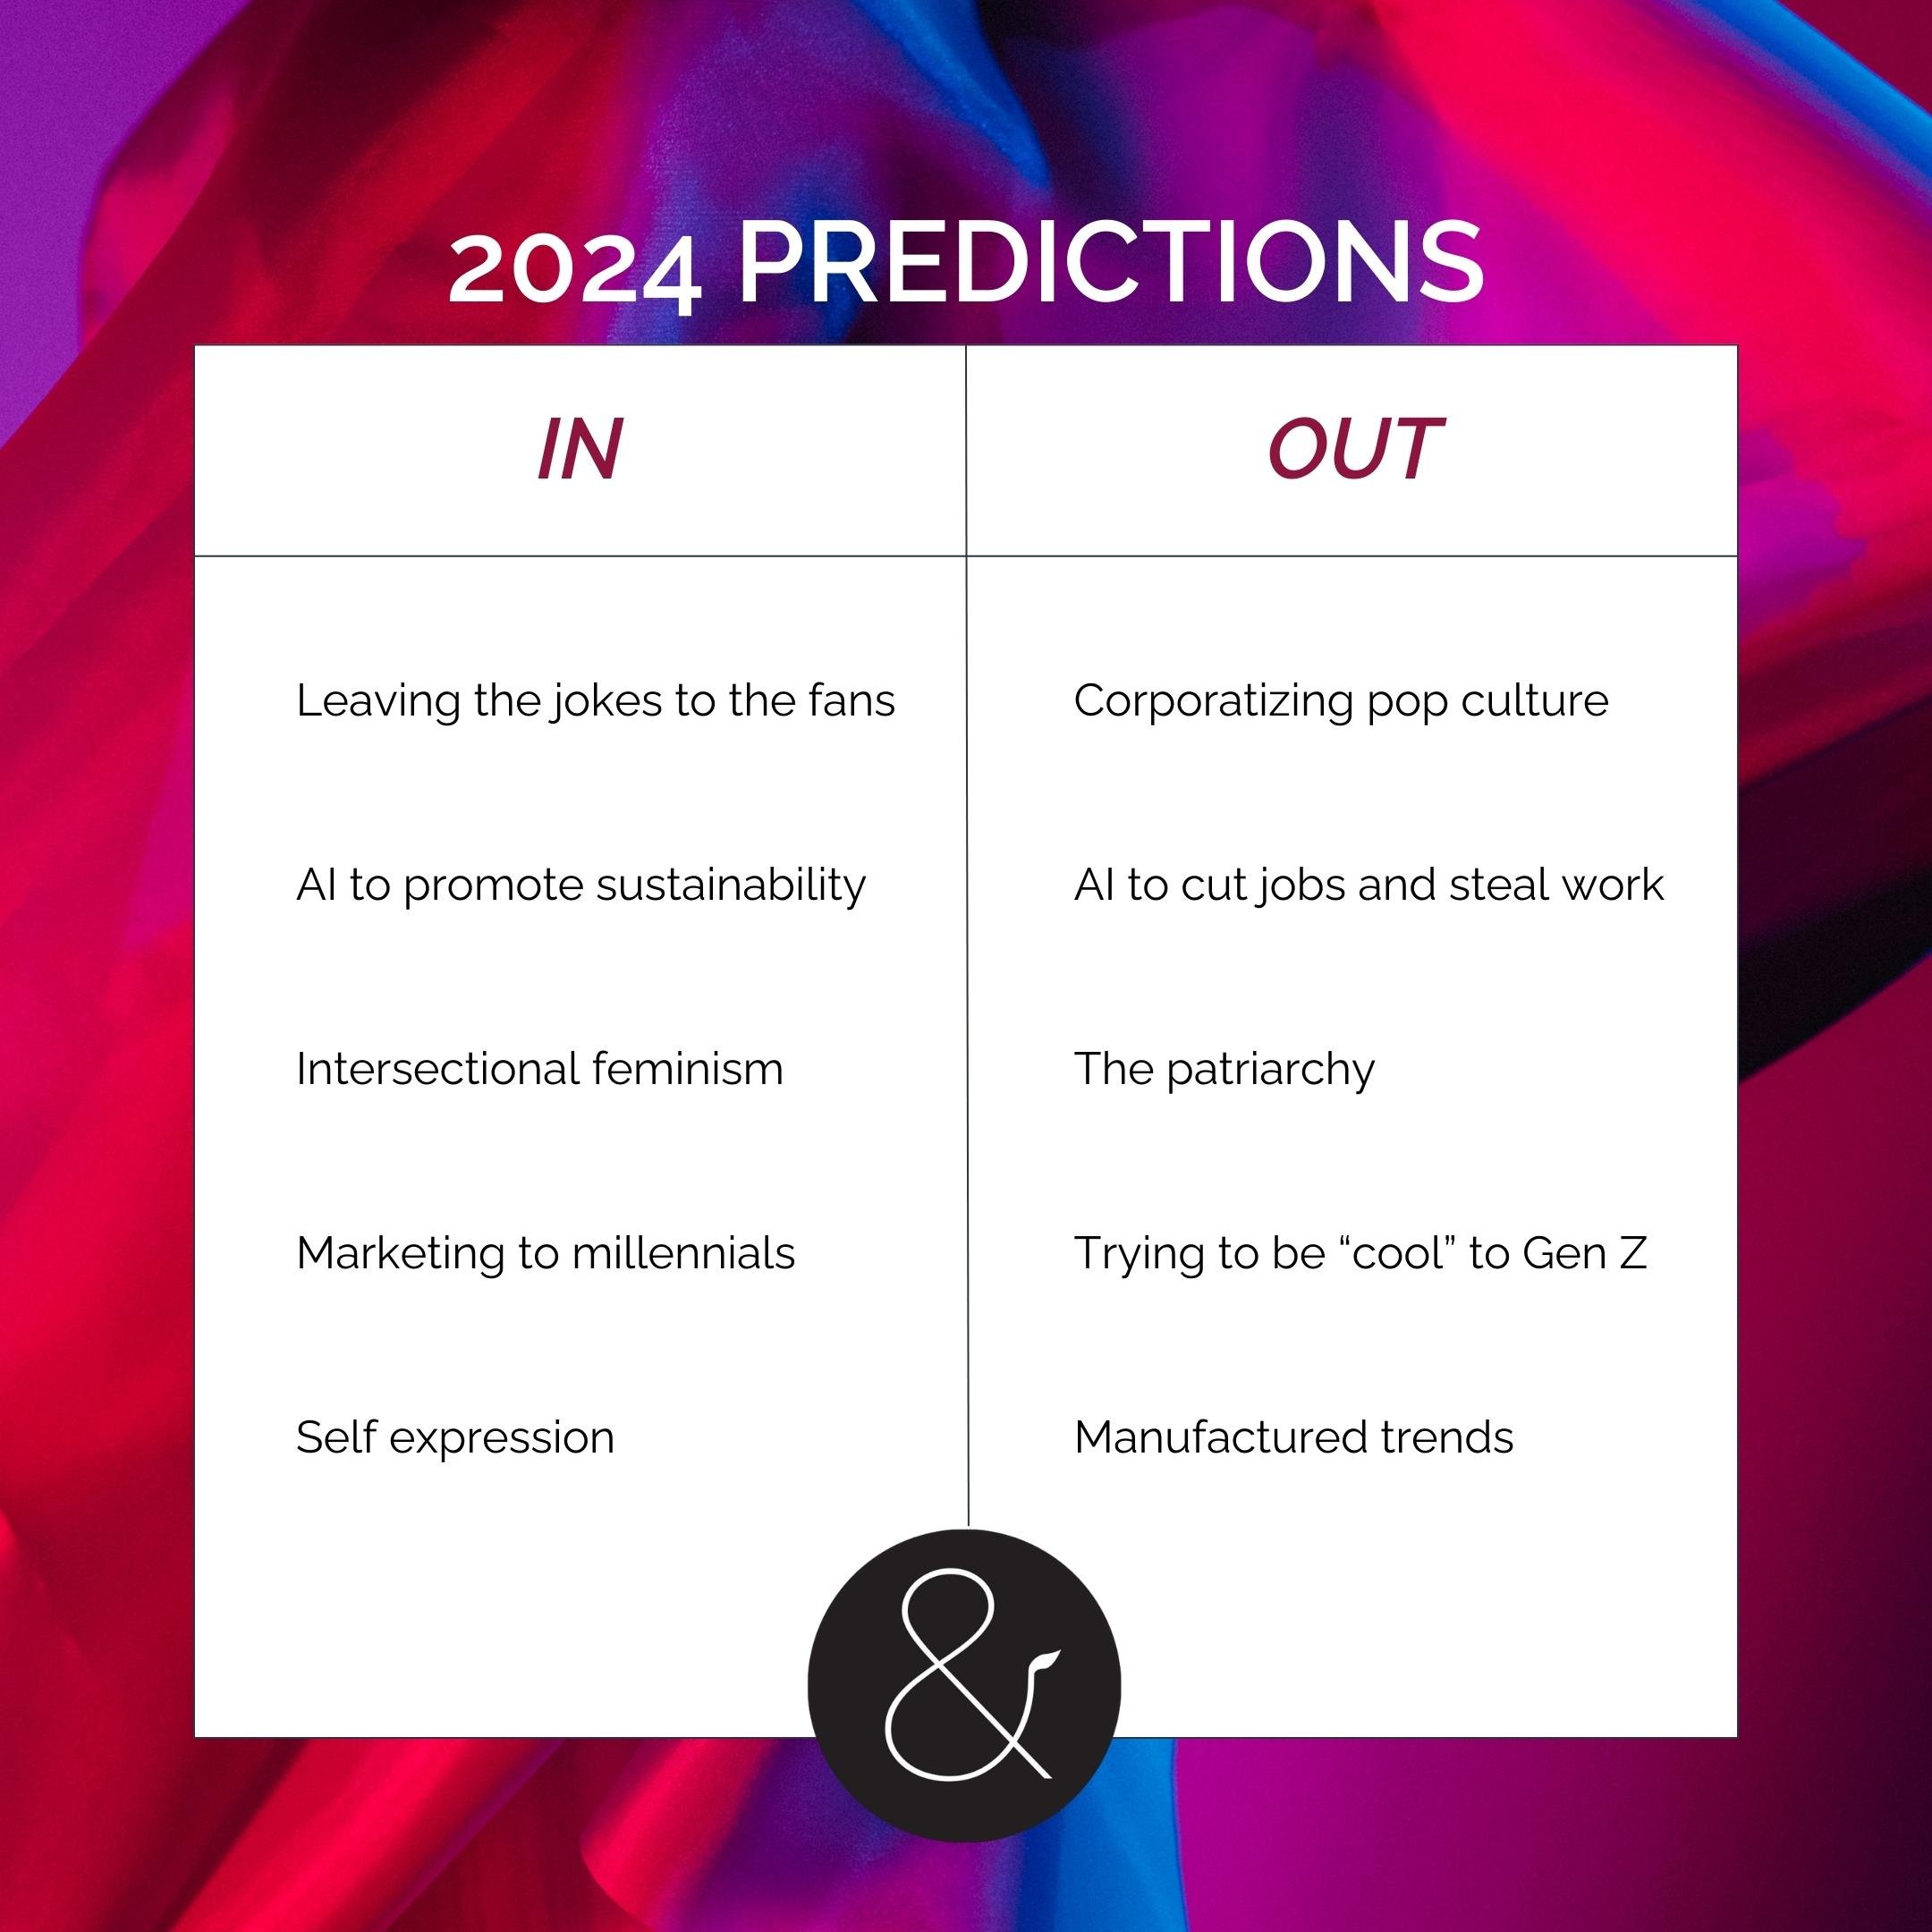 Marketing Predictions for 2024 and other Marketing Trends